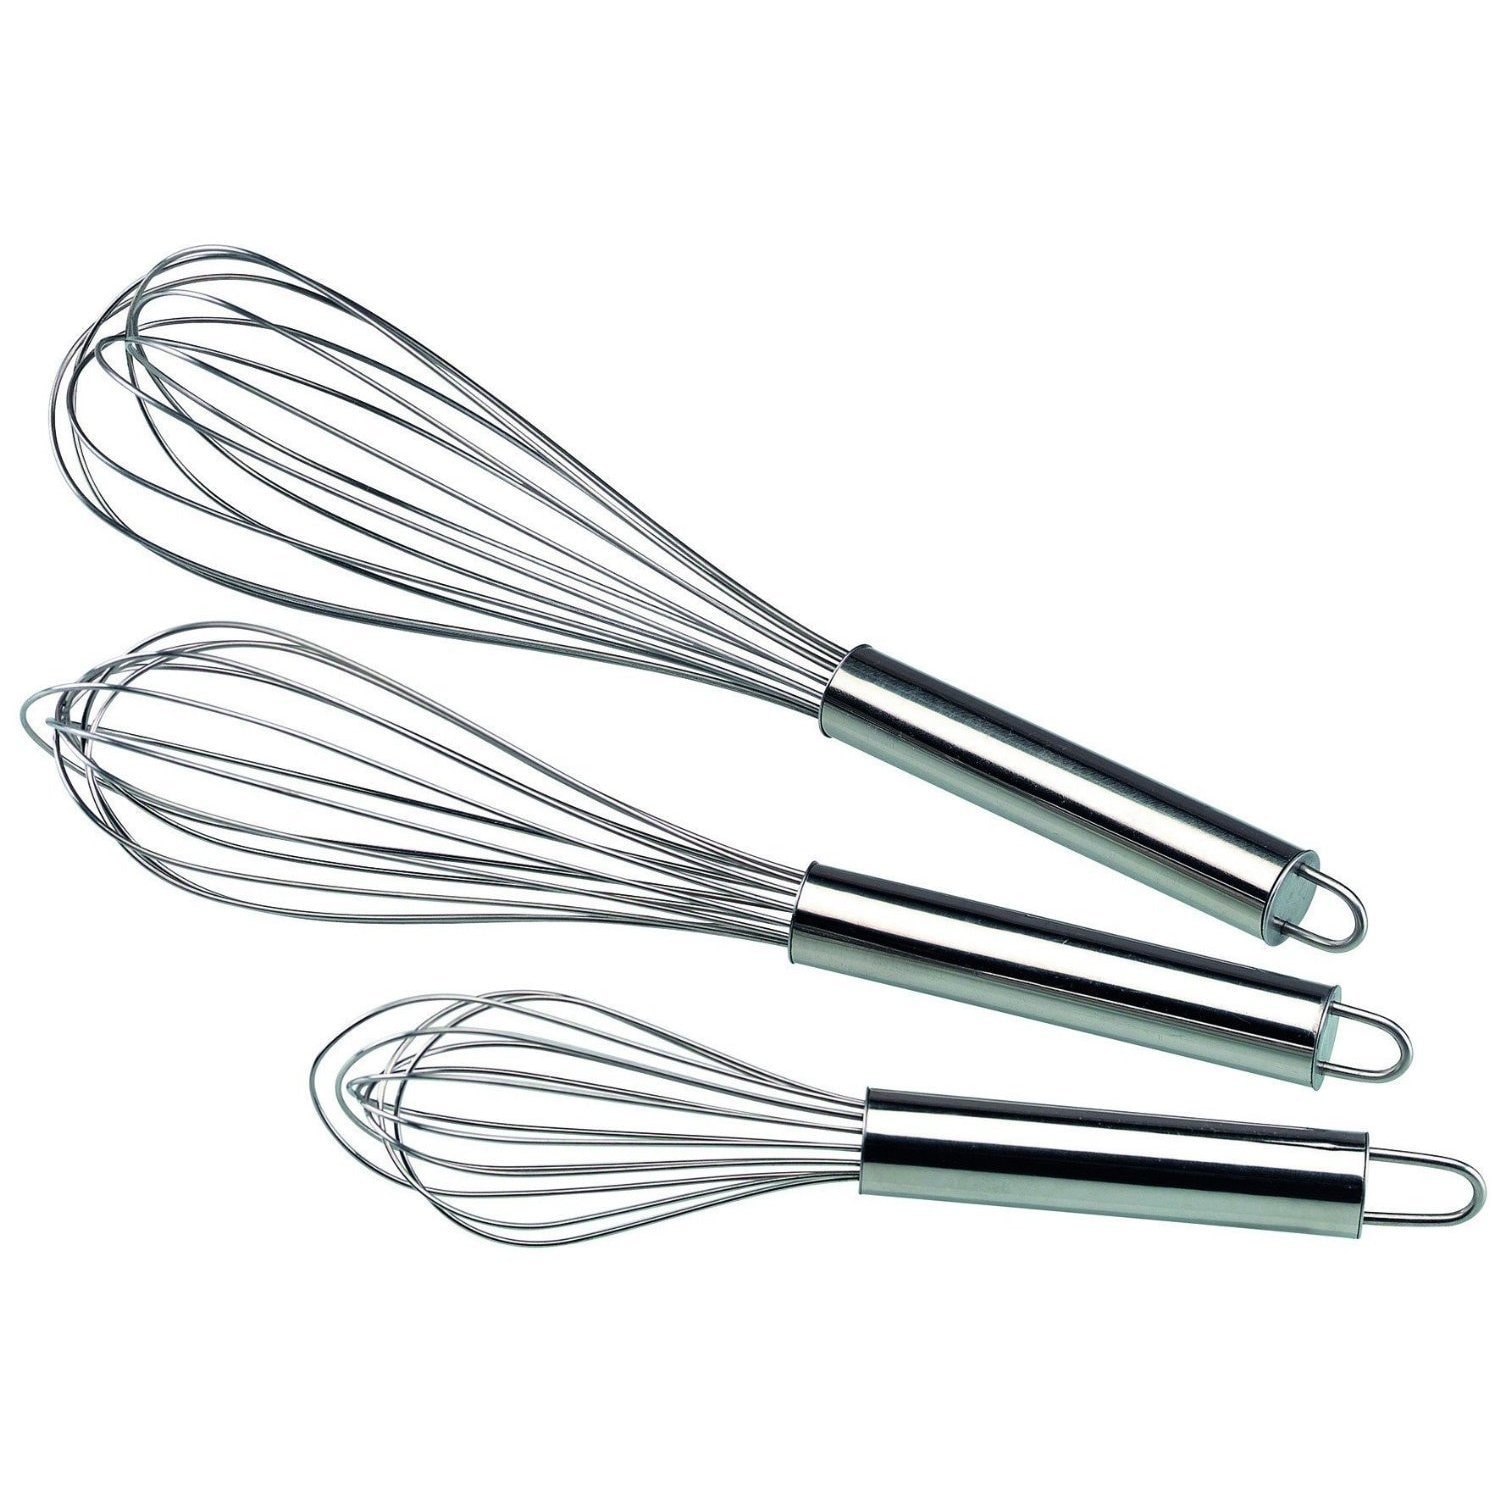 ReaNea Gold Whisk Set of 3 Stainless Steel 8 10 12 Beater Wire Whisks  for Cooking Kitchen Wisk